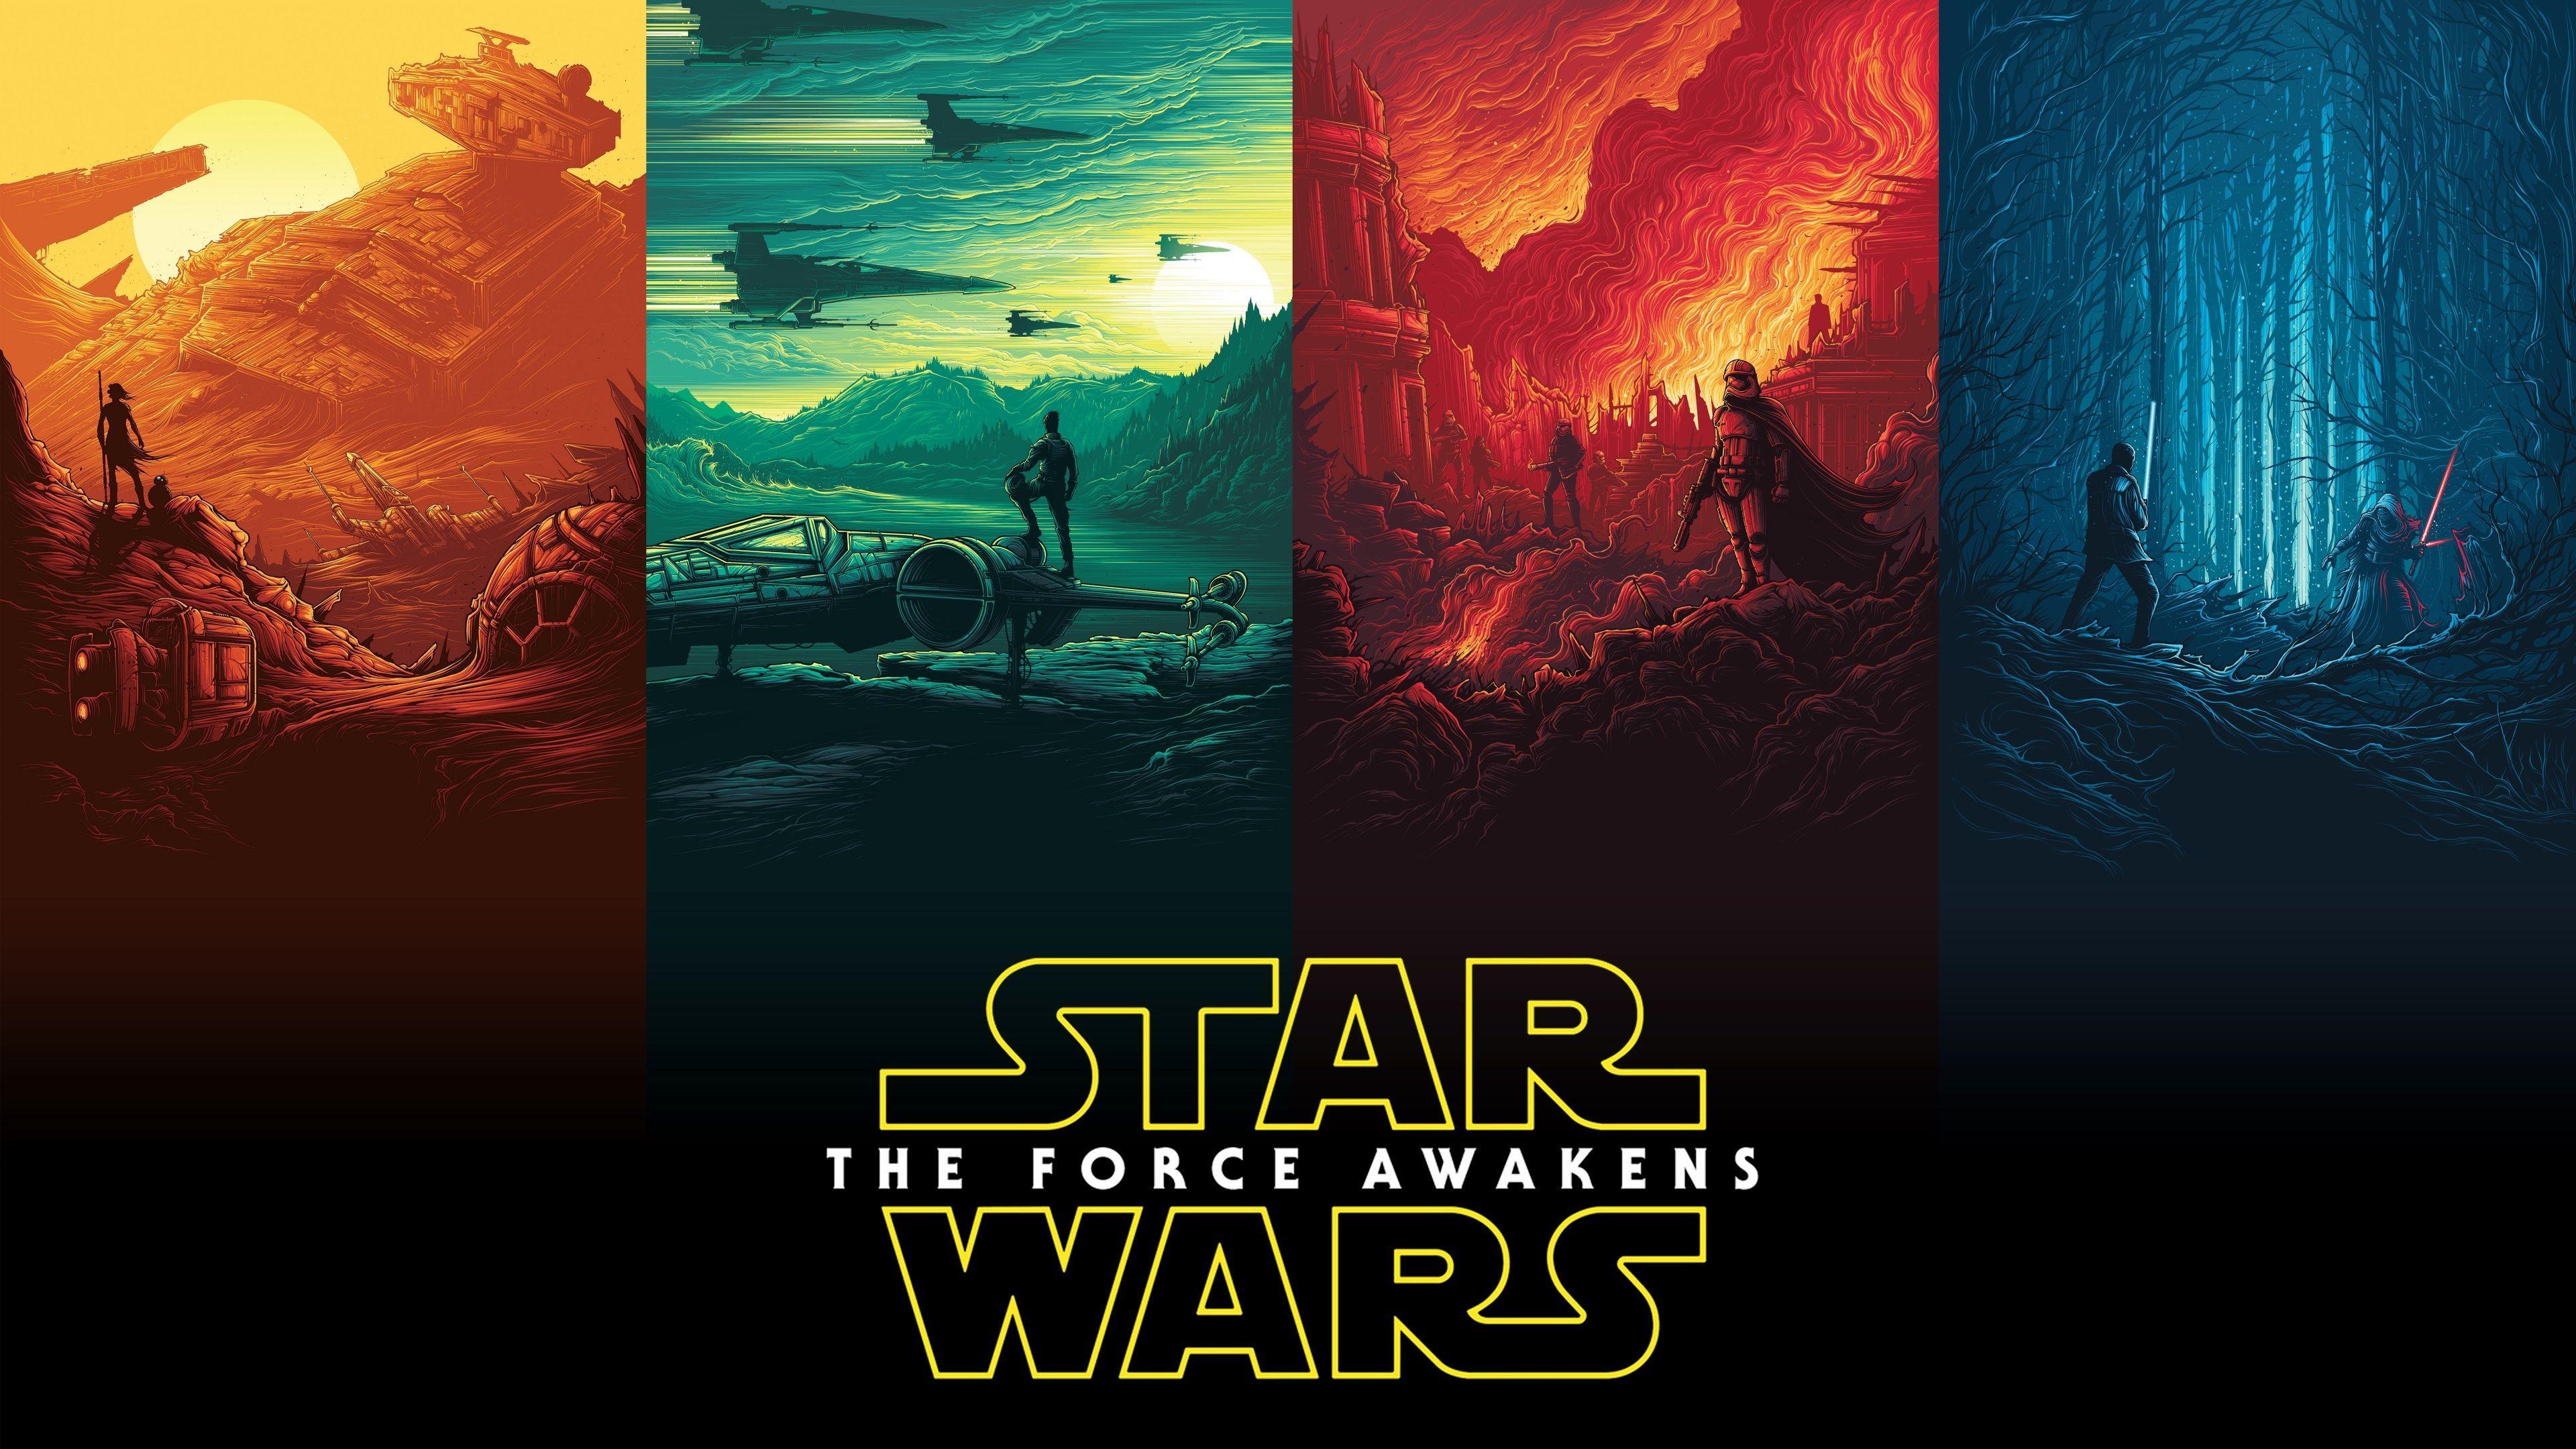 Star wars the force awakens poster - Star Wars